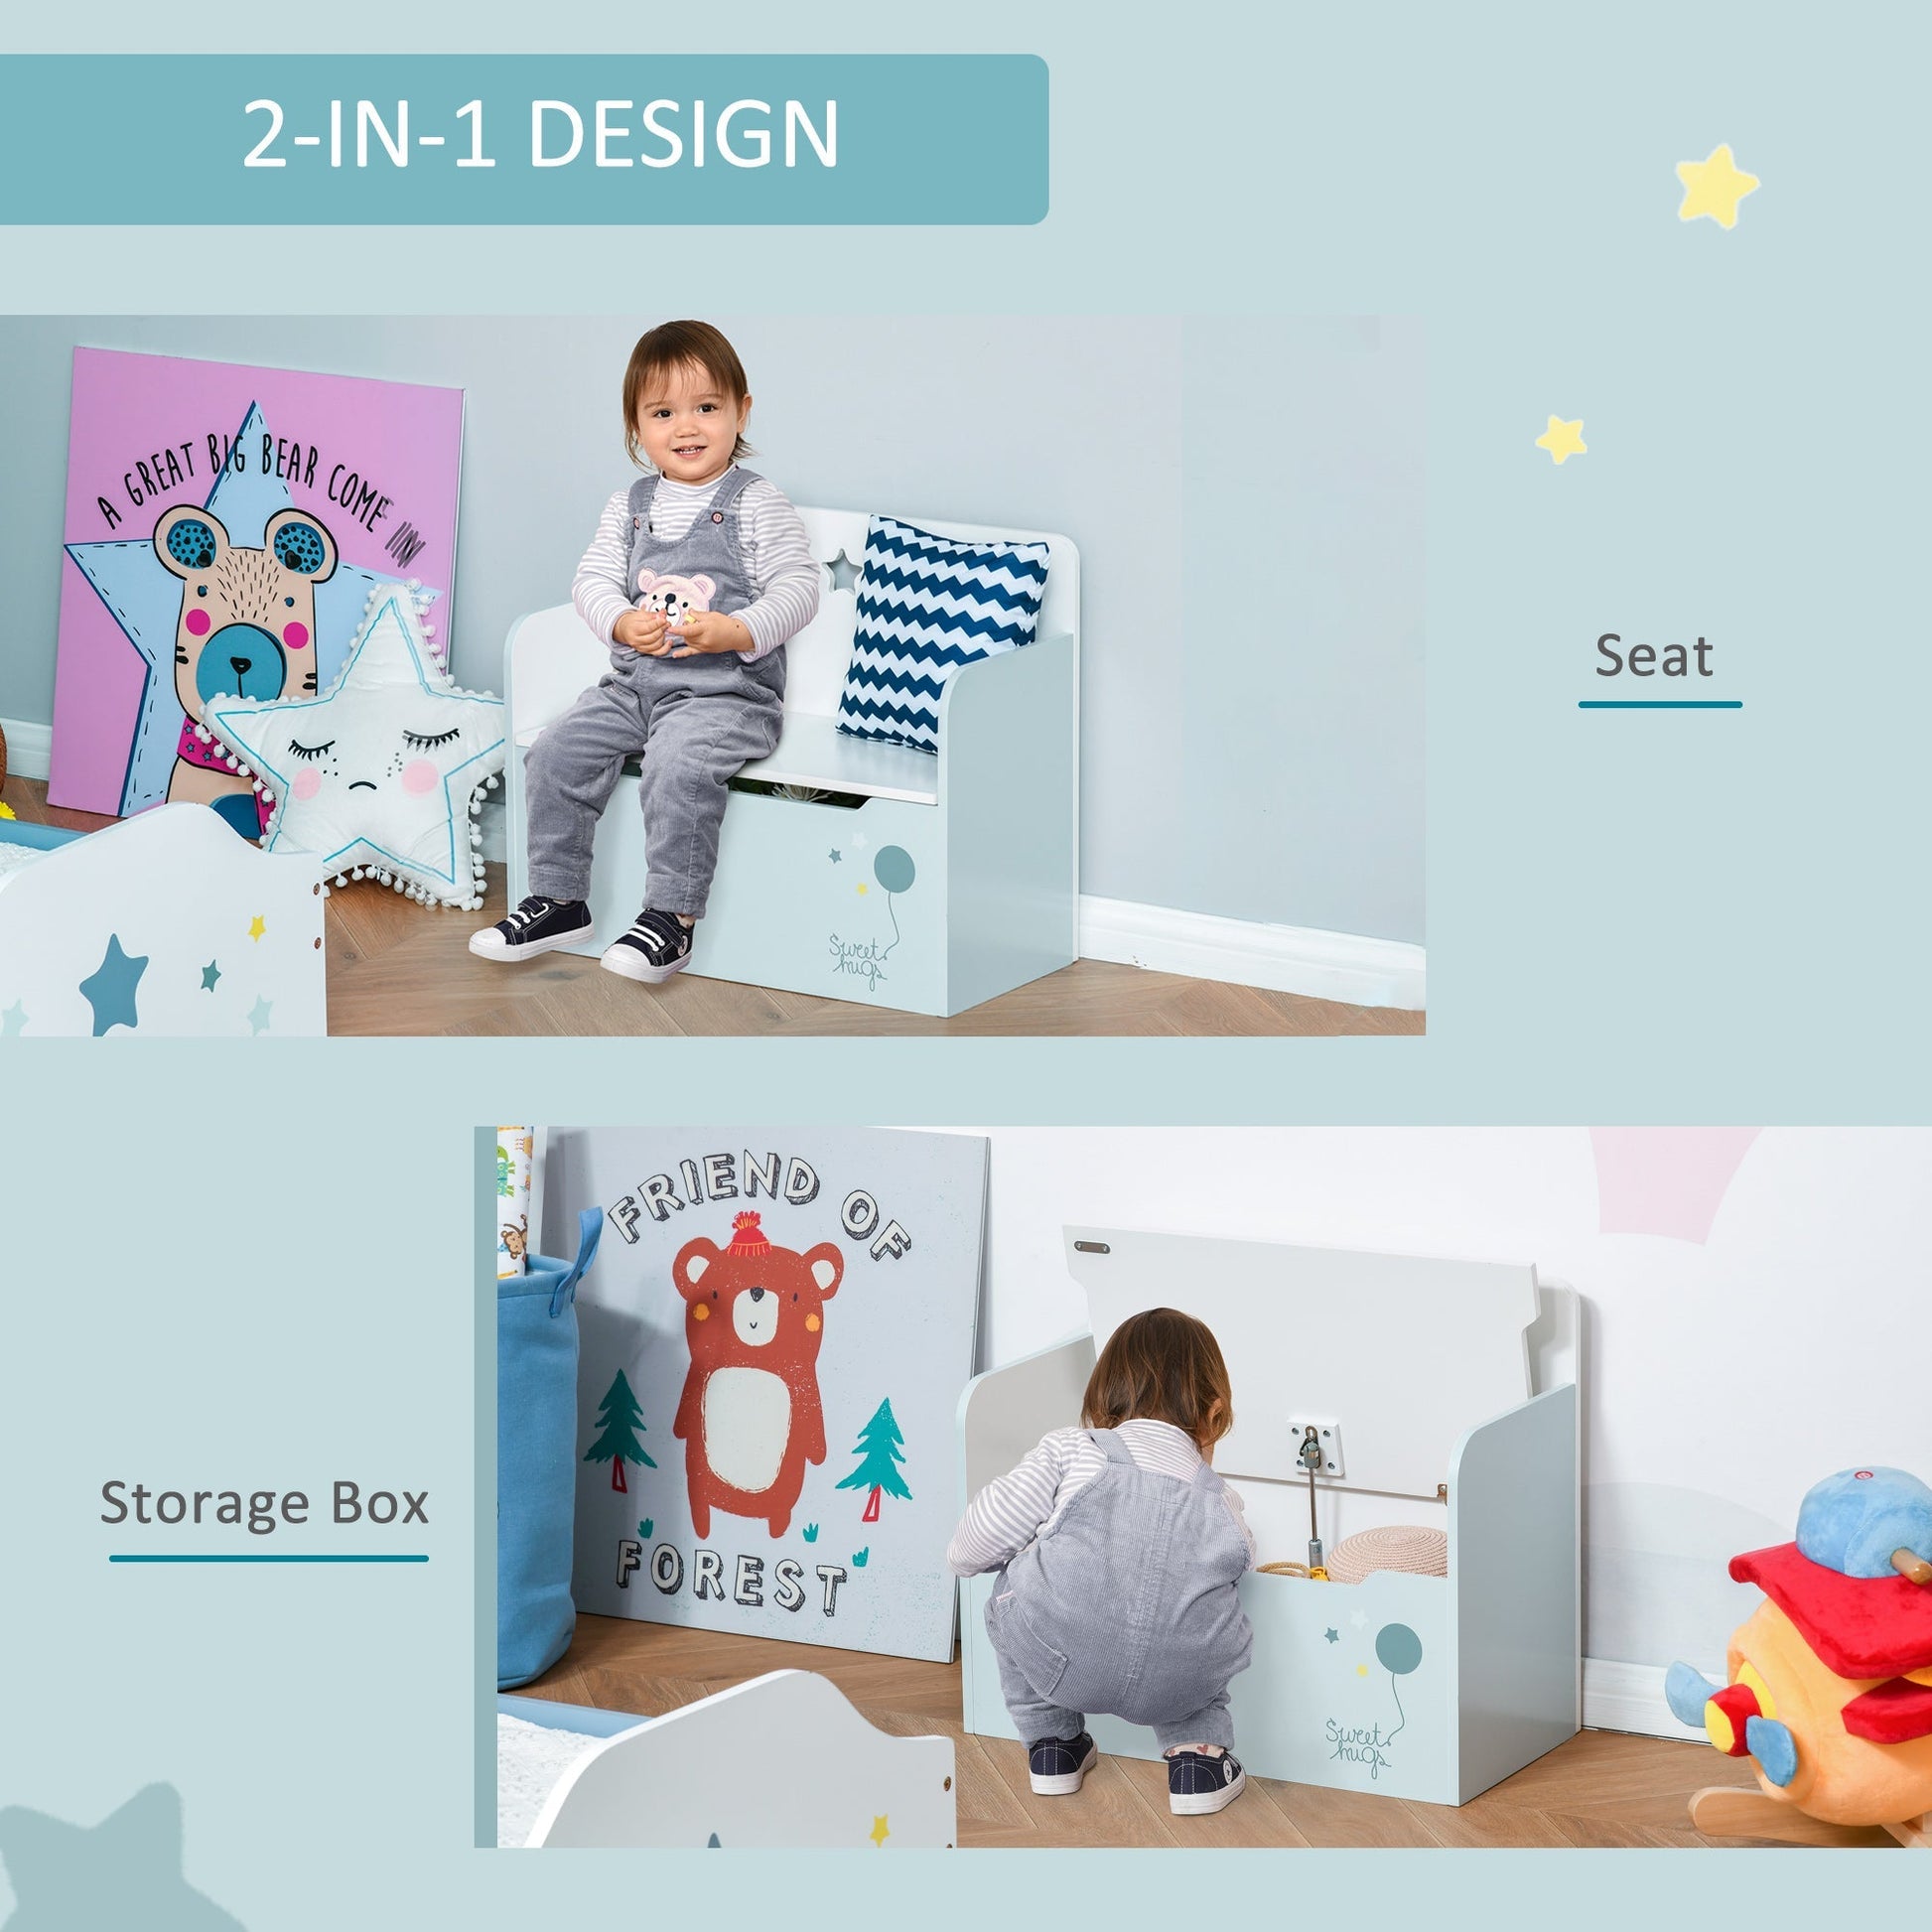 Kids Wooden Toy Storage Box Organizer Chest Chair 2 in 1 Design with Gas Stay Bar Seating Bench 23.5" x 11.75" x 19.75" Light Blue - Gallery Canada